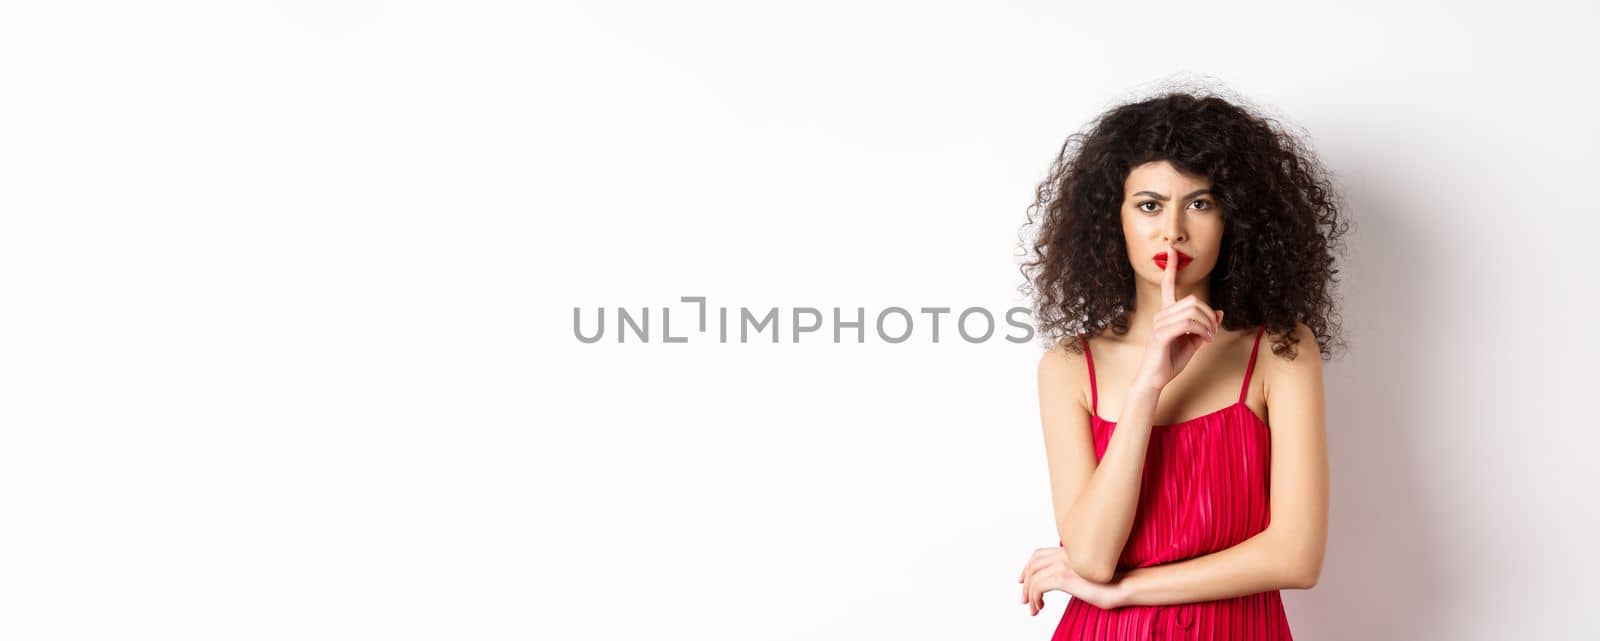 Angry elegant woman in red dress hushing and frowning, tell to be quiet, asking for silence, standing over white background.